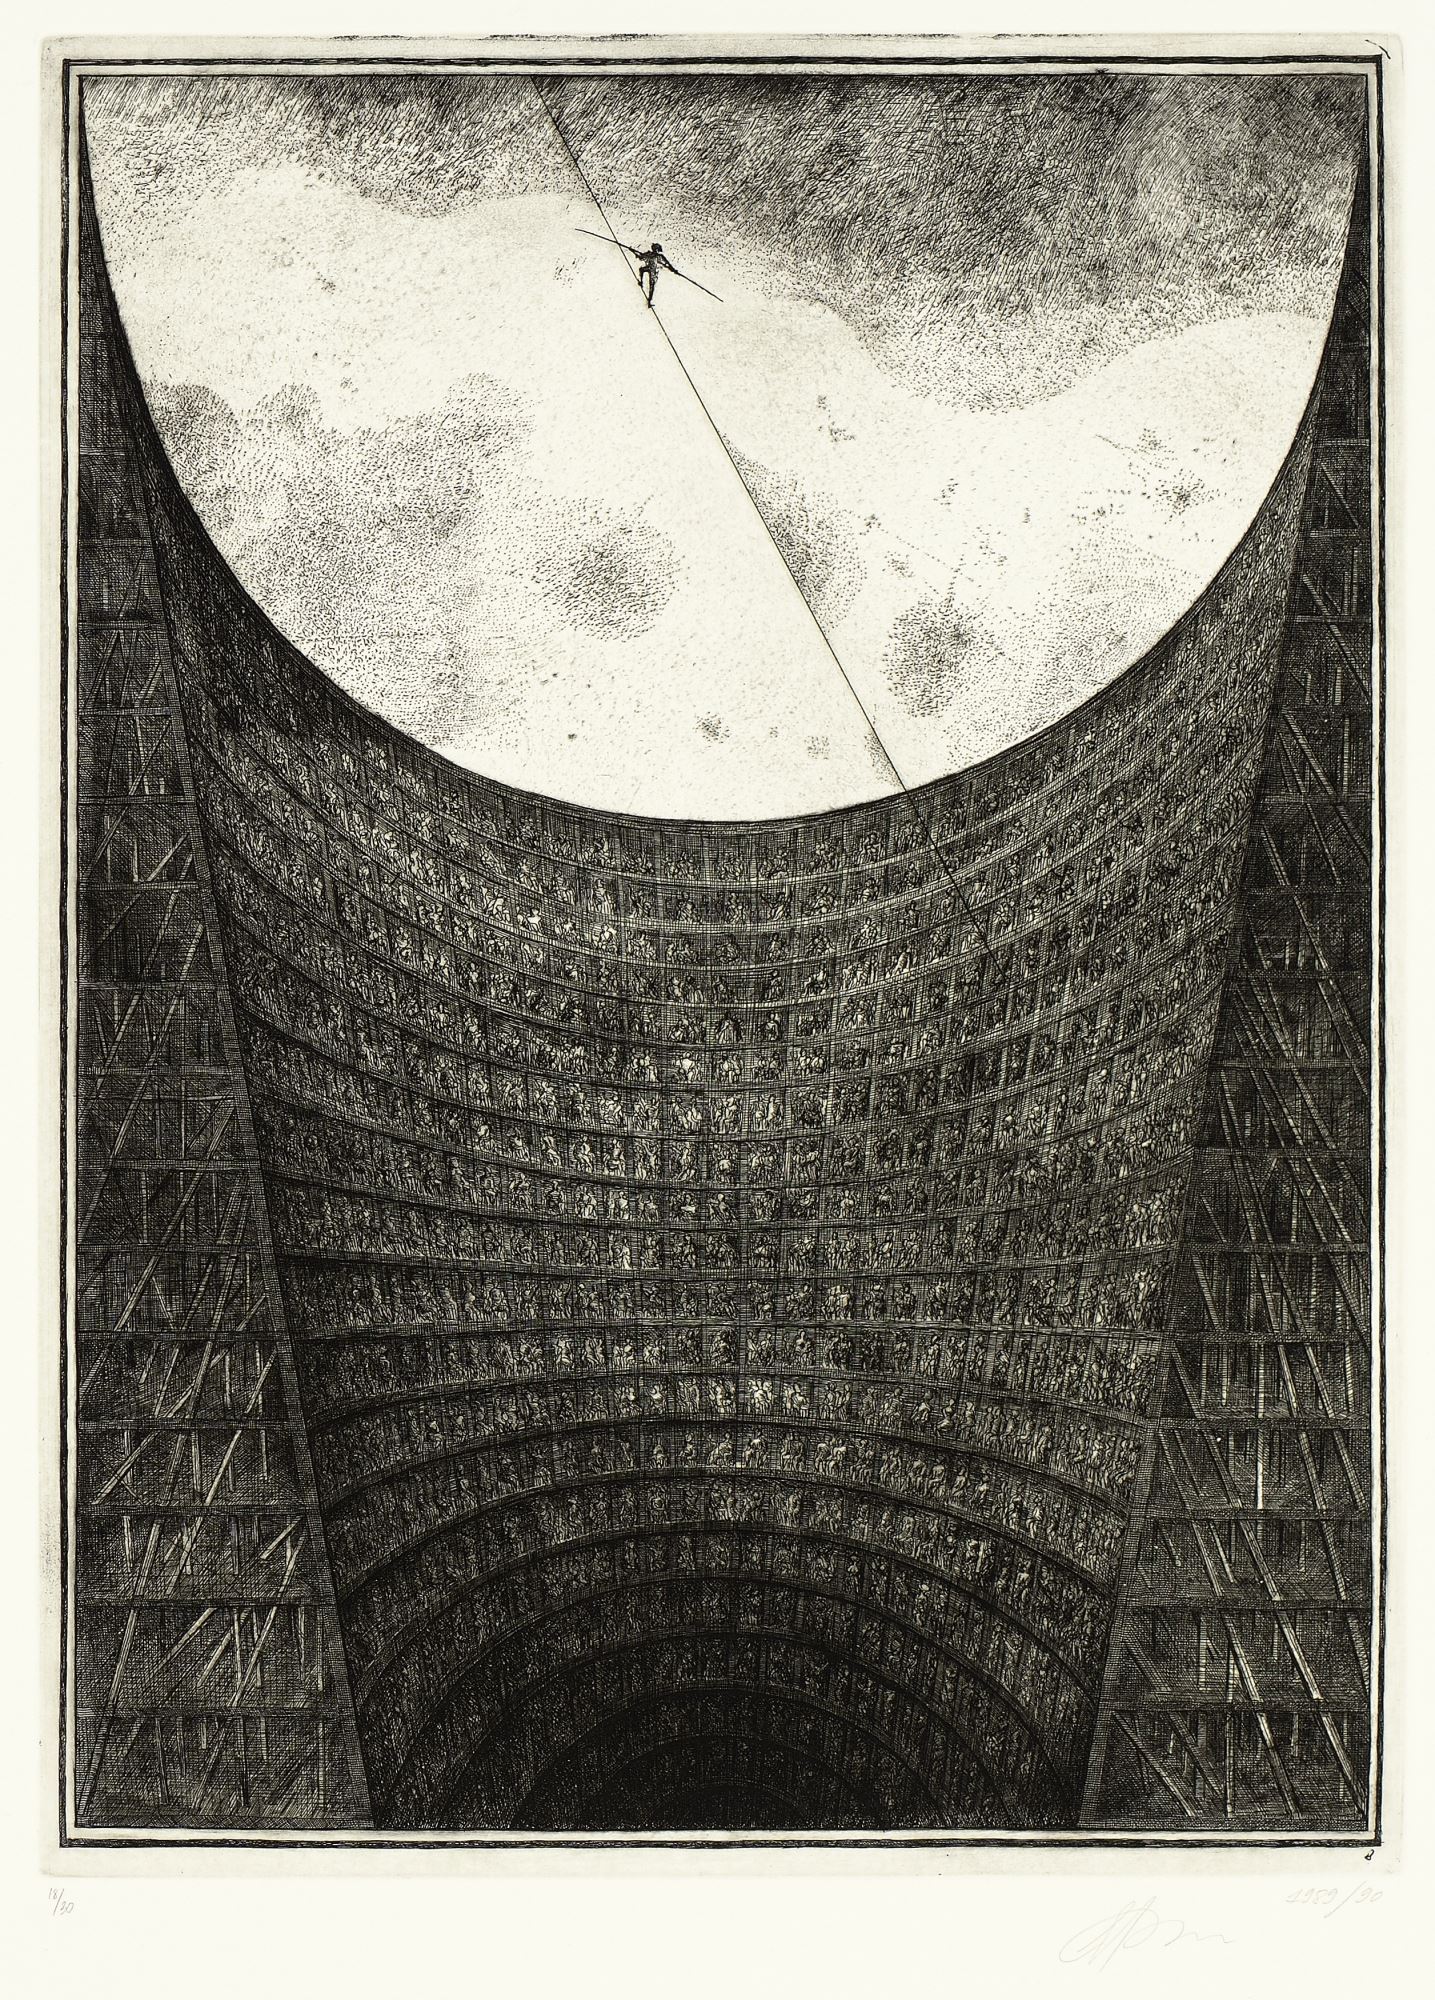 <p>Brodsky and Utkin, <em>Amphitheater.</em> Etching on paper, 31 1/8 x 24 1/4 inches. Collection of the Nasher Museum of Art at Duke University.</p>
